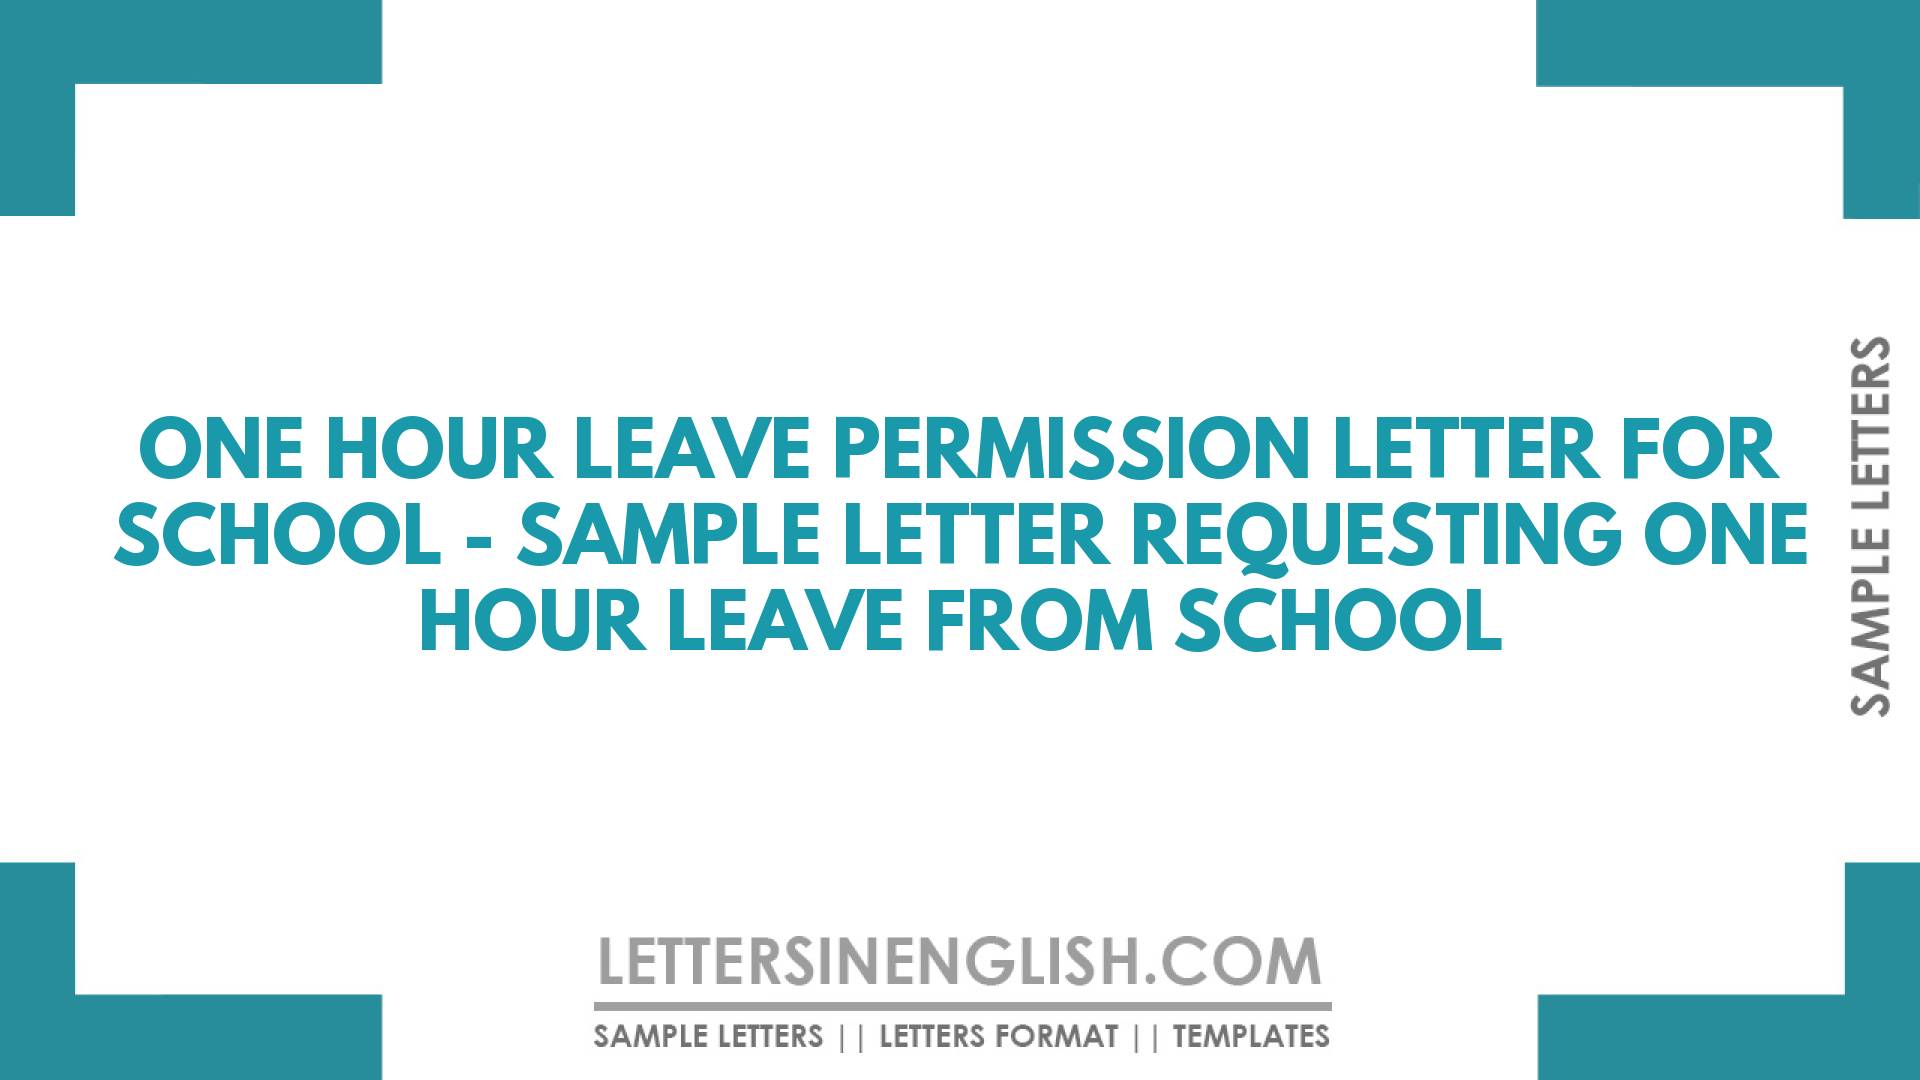 One Hour Leave Permission Letter for School – Sample Letter Requesting One Hour Leave from School